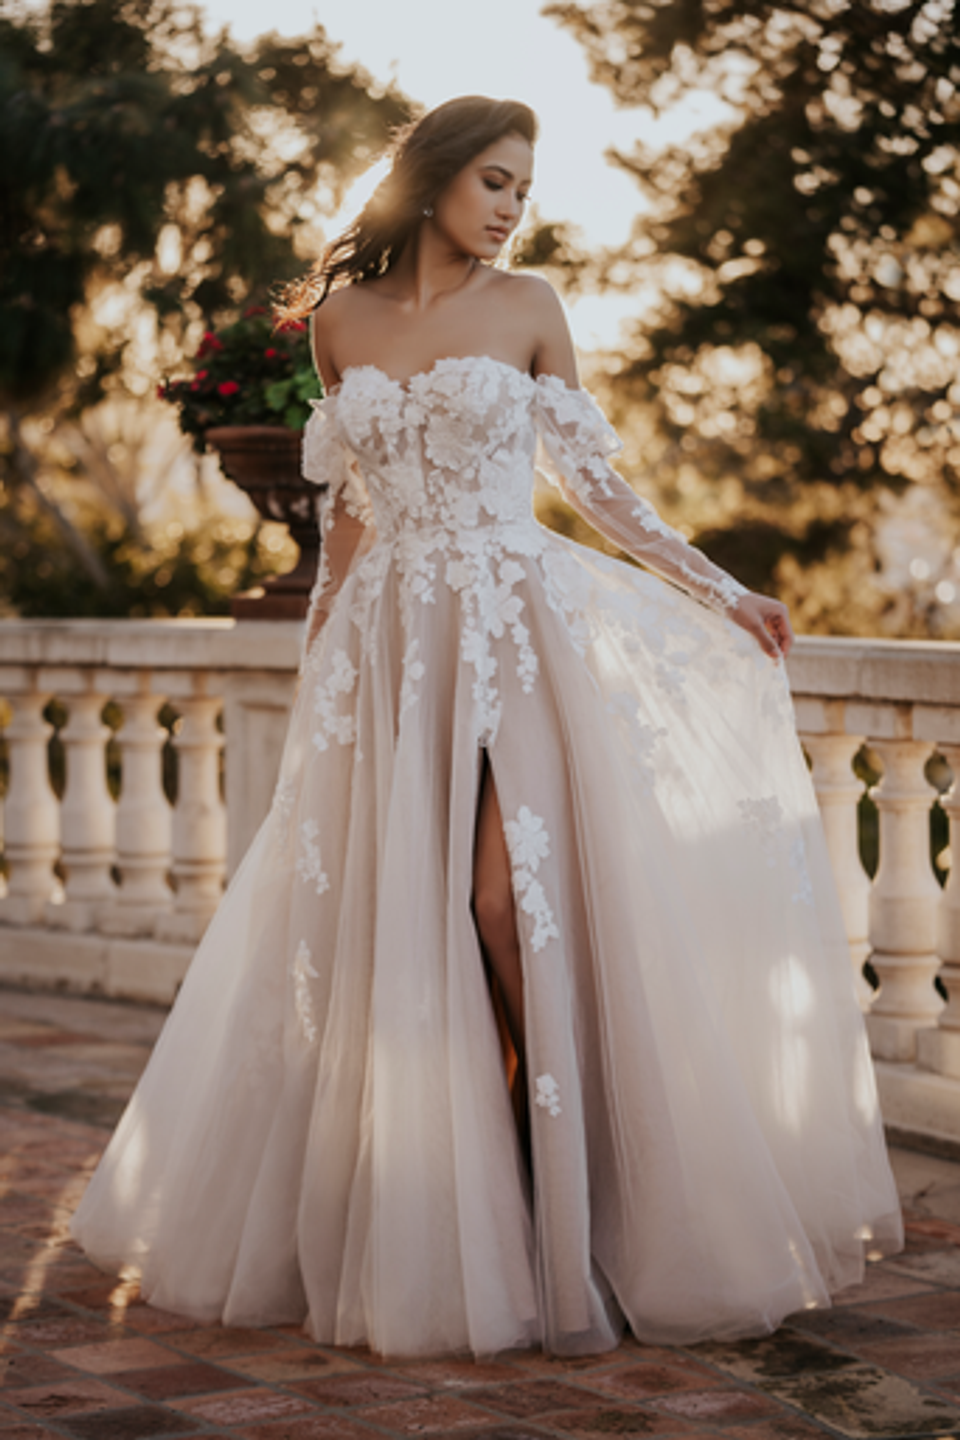 Allure Bridal Dresses & Gowns, Lace Wedding Dresses By Allure